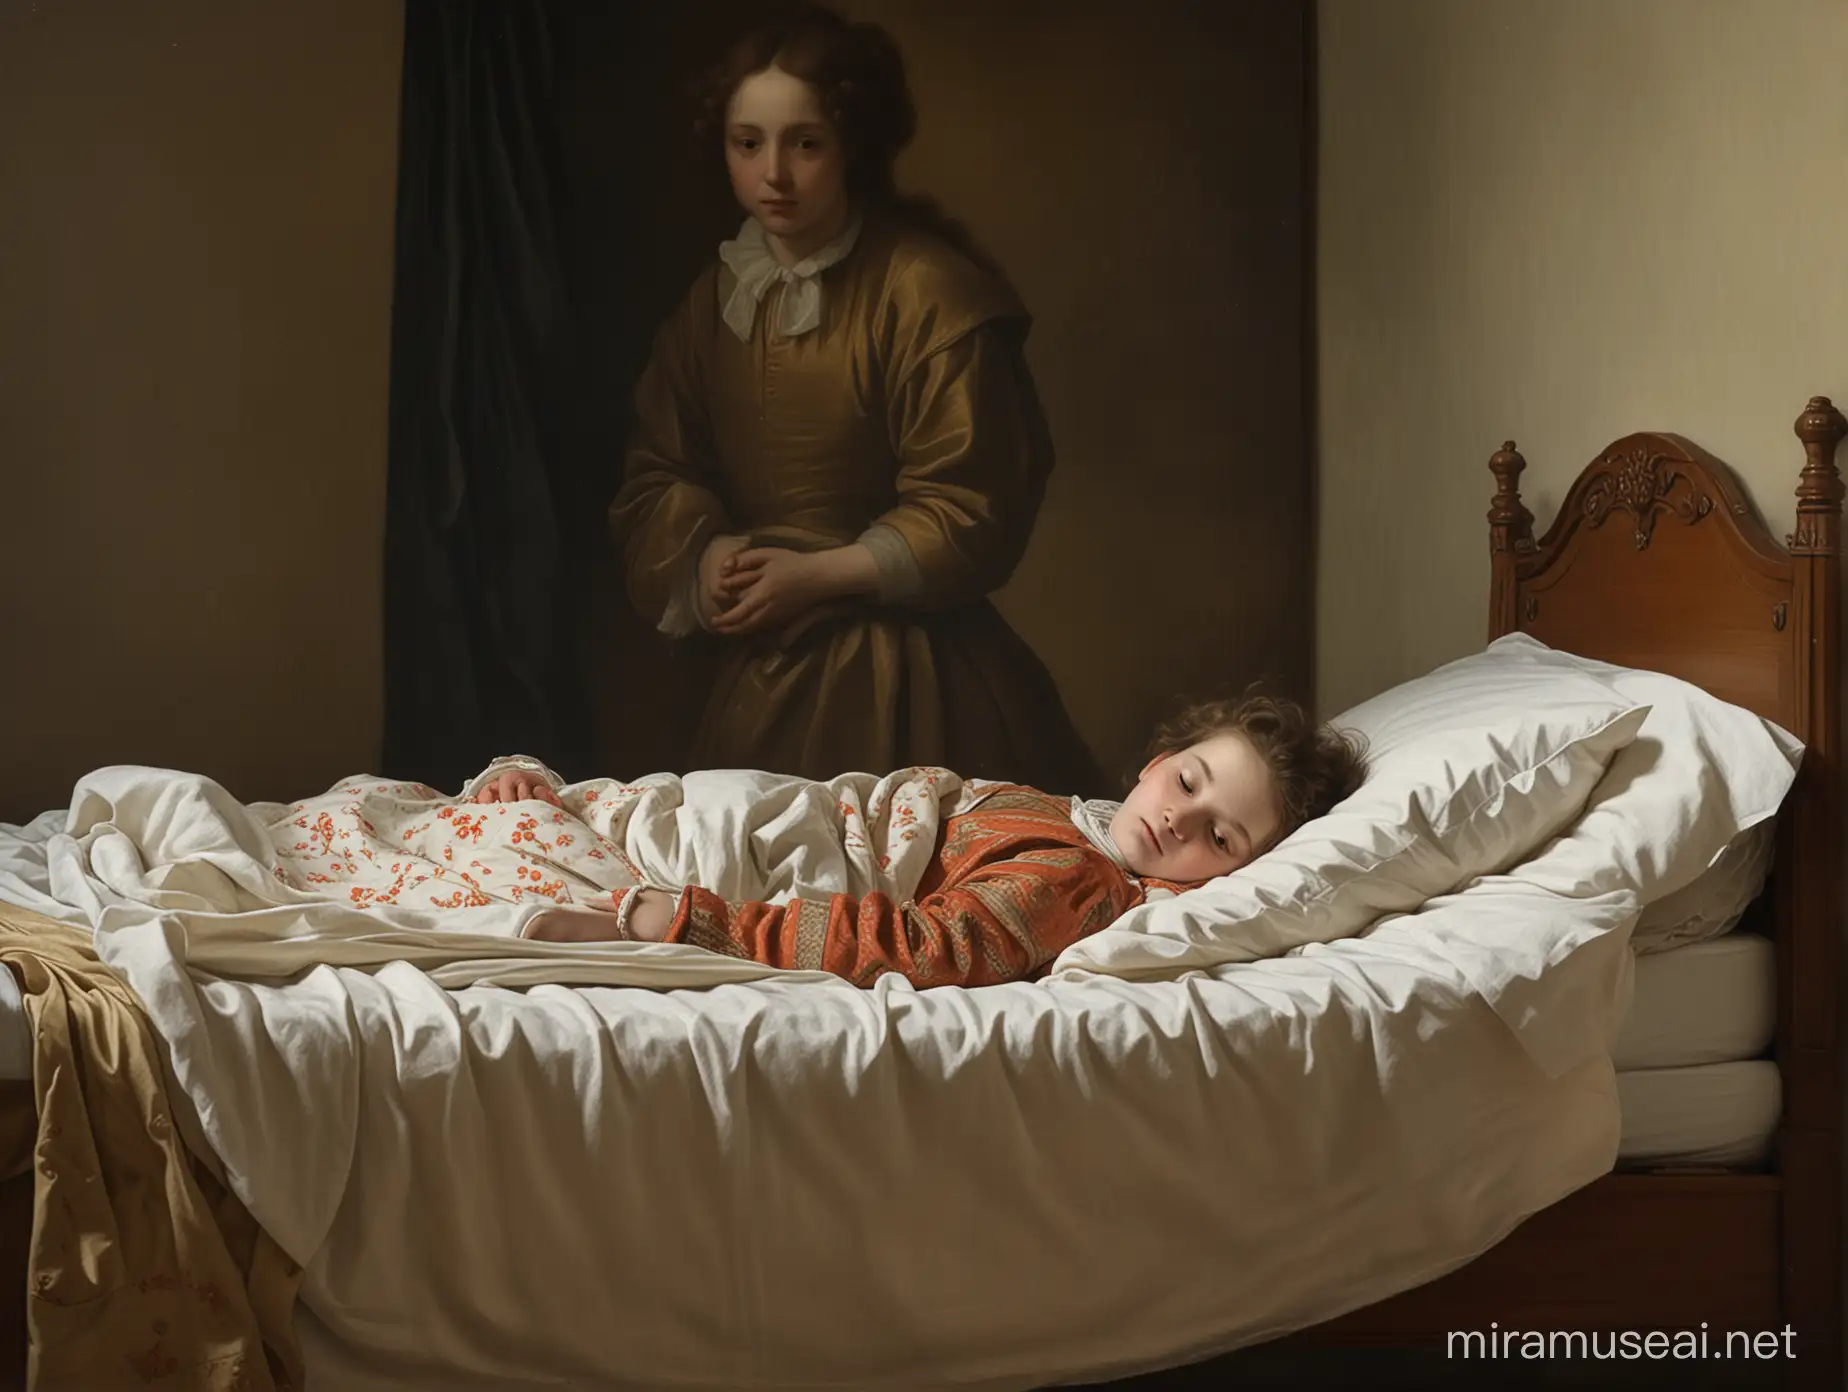 a child on their deathbed in a style of 17th century painting